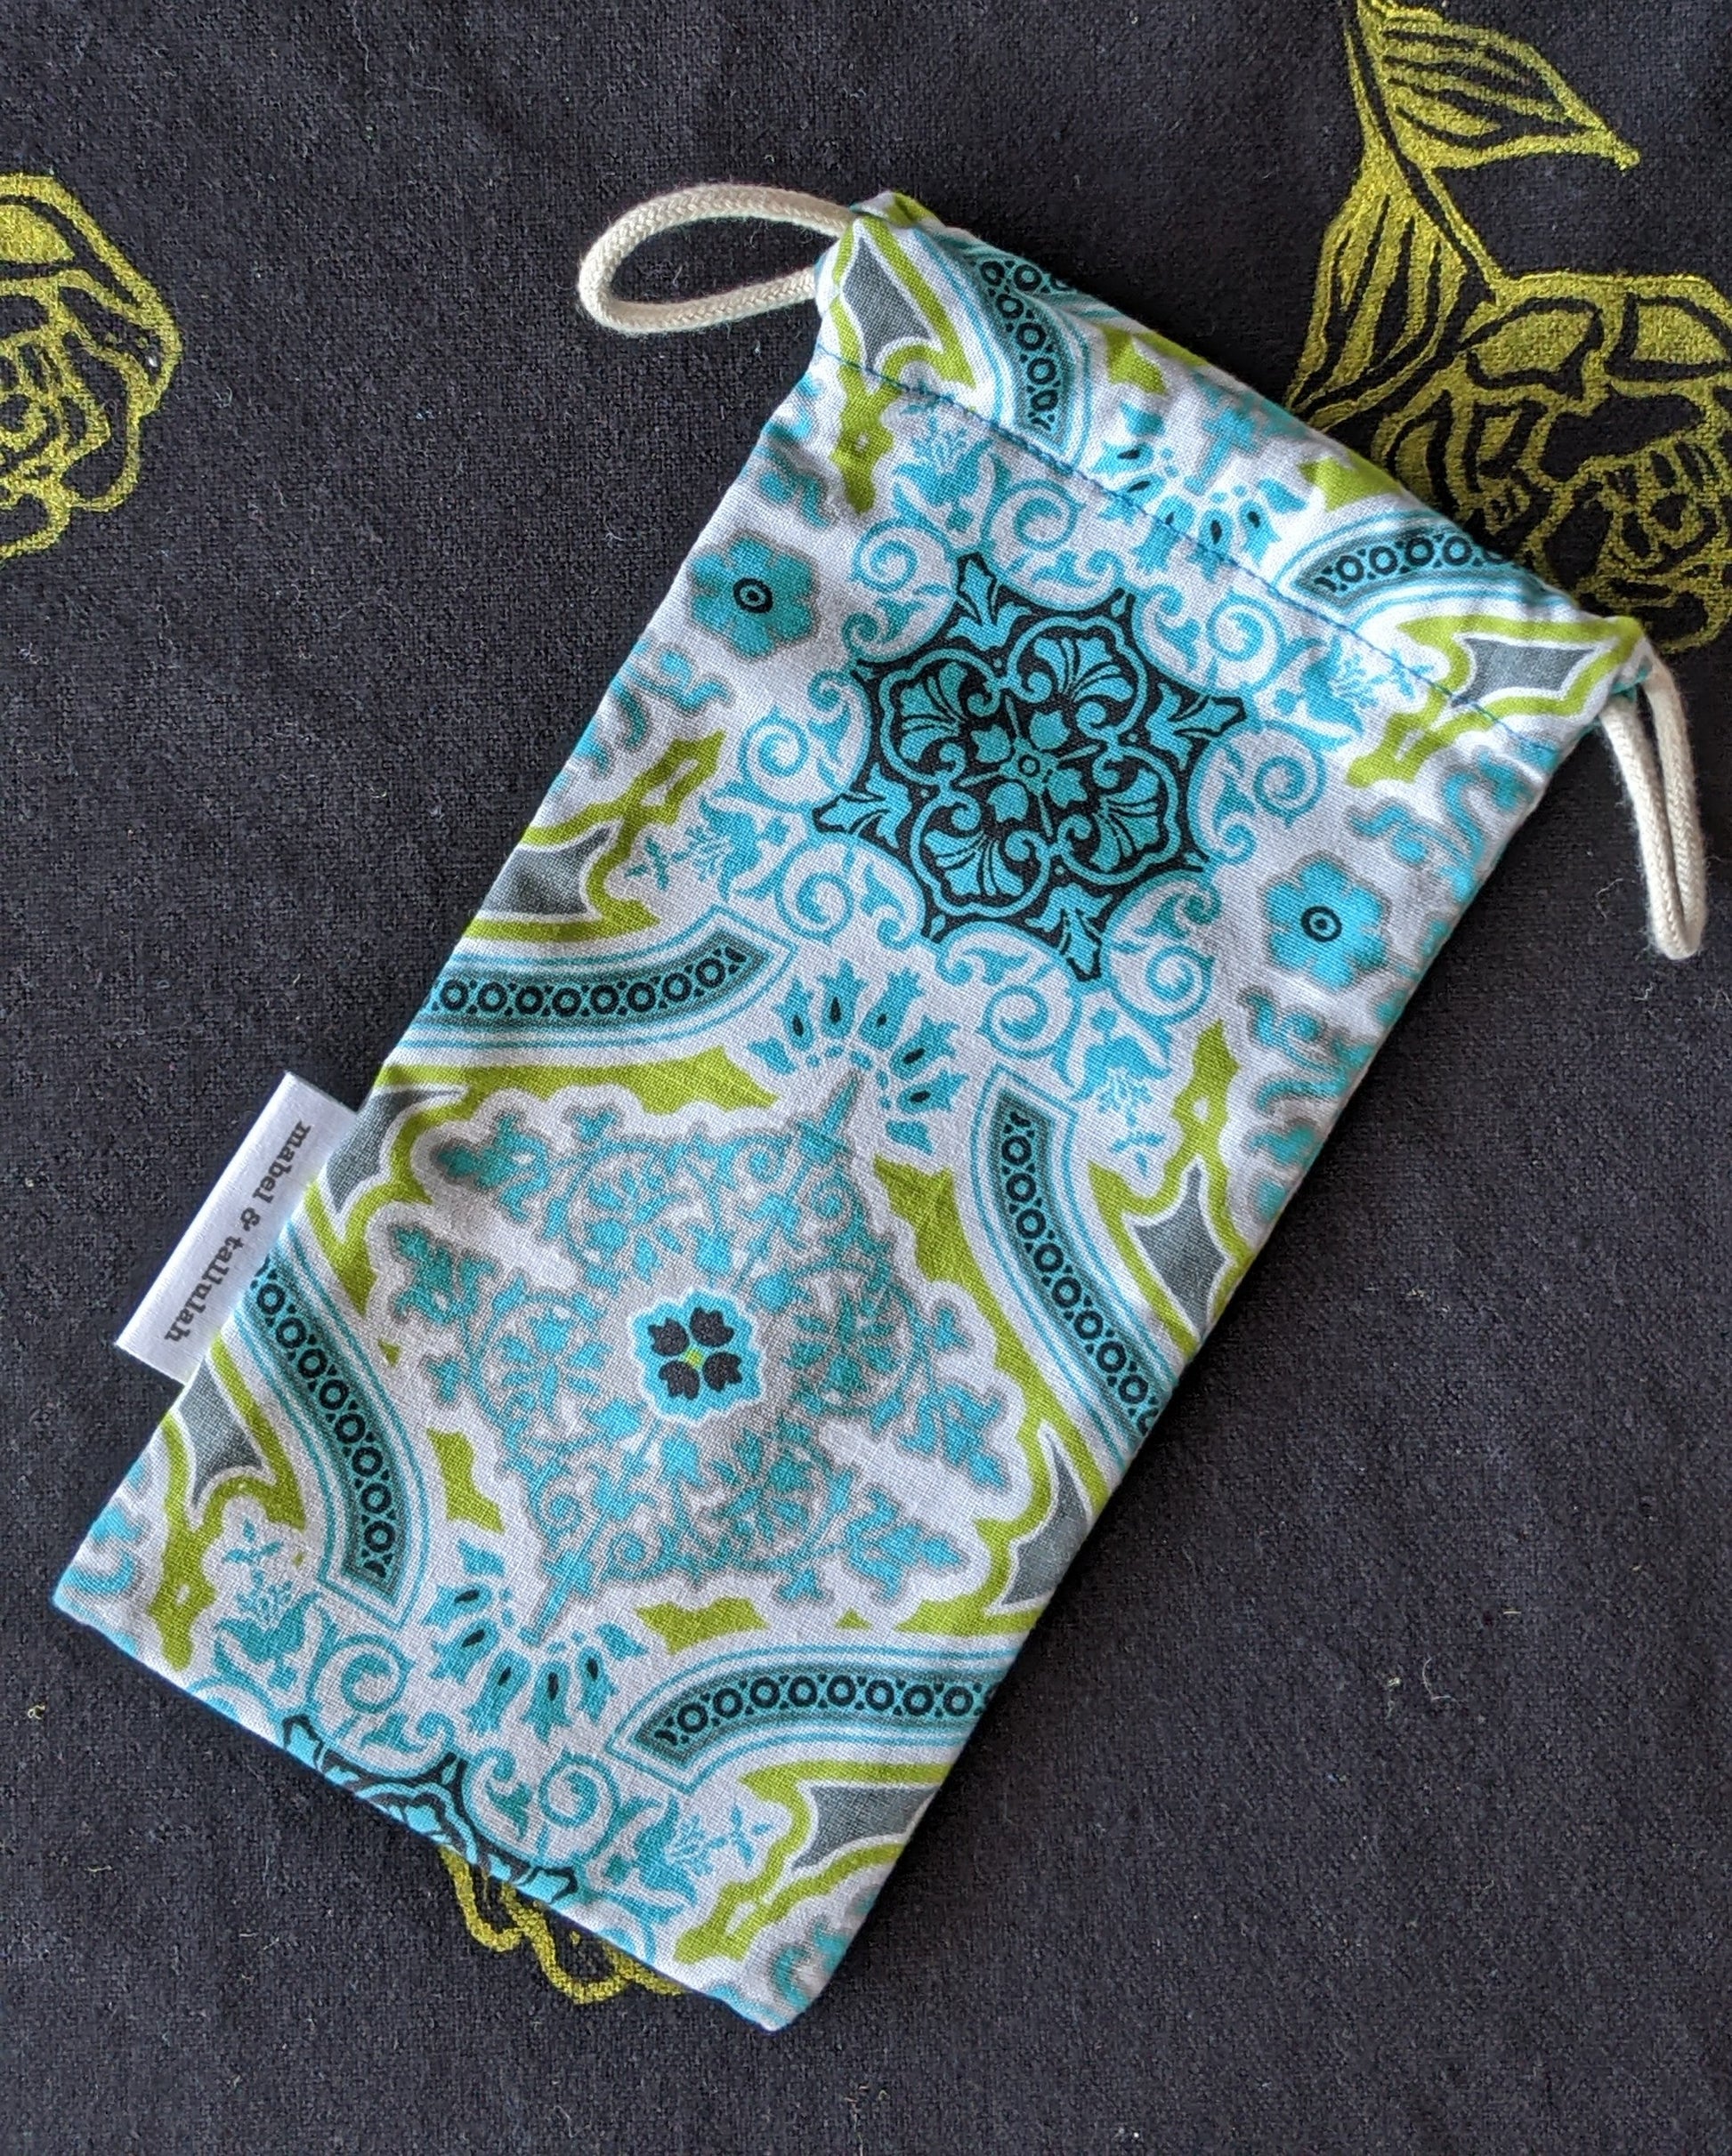 Blue yellow pattern sunglasses cover mini pouch by The Arthly Box